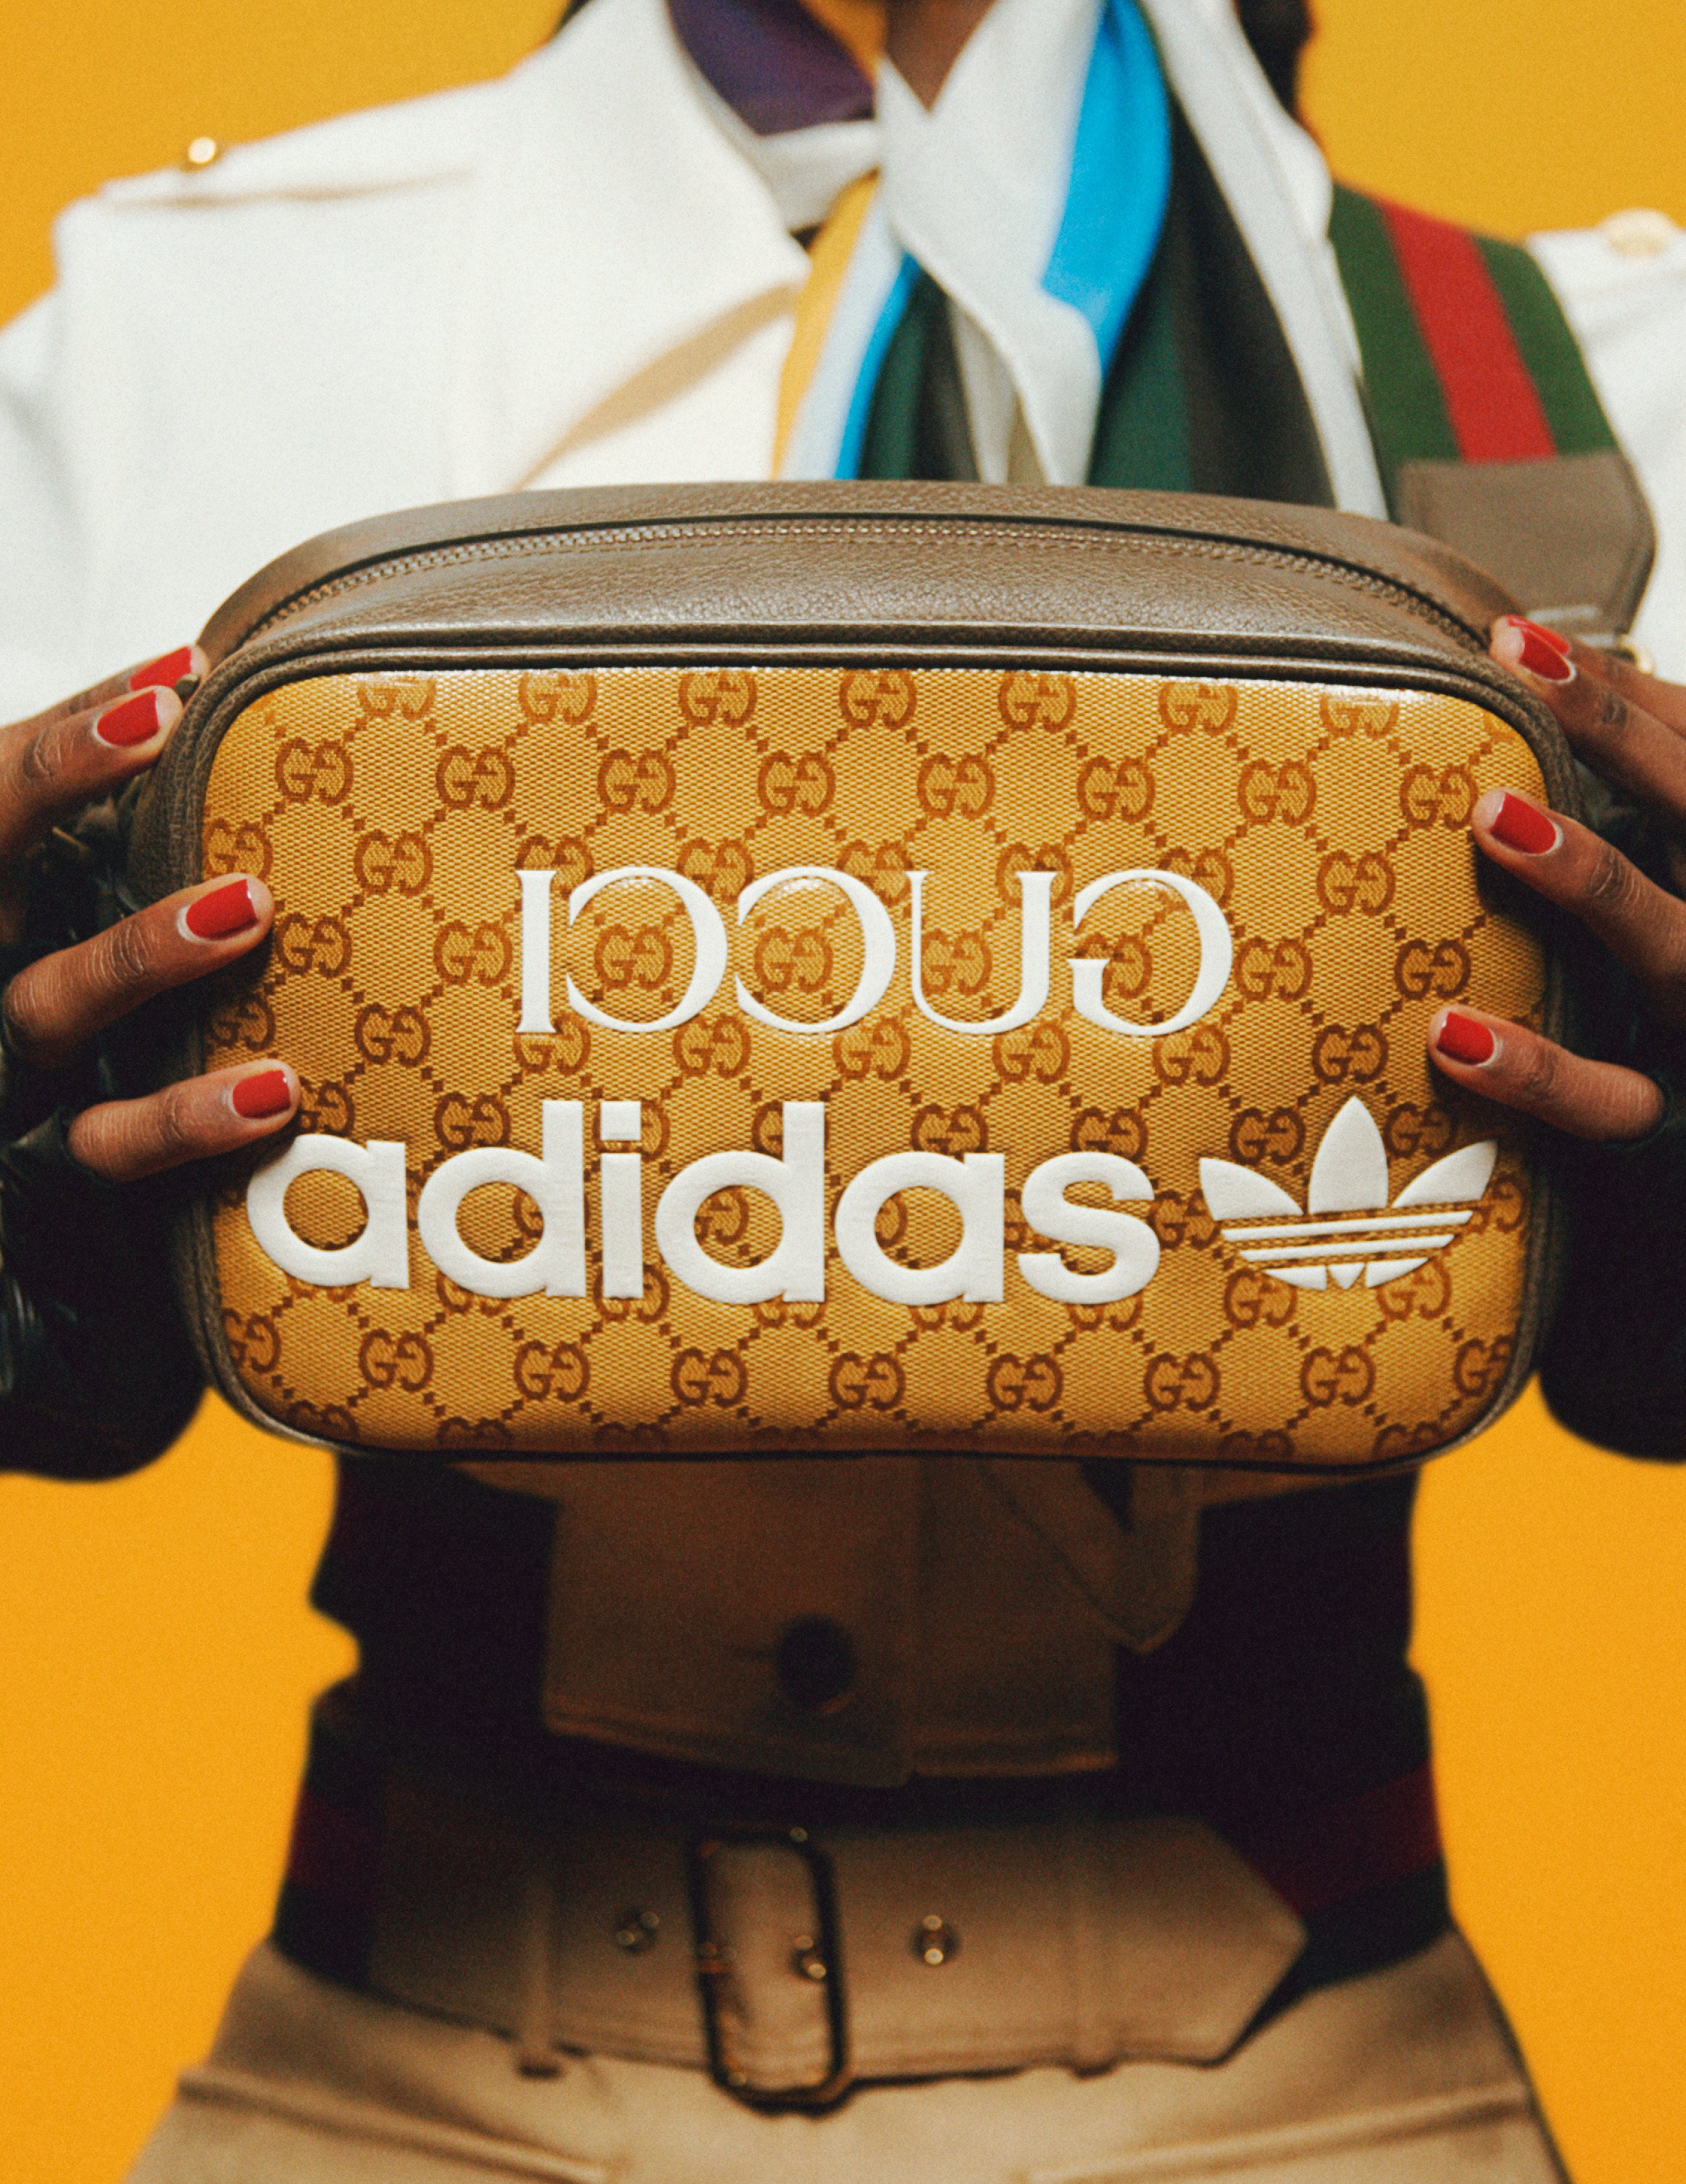 Louis Vuitton and Adidas have collaborated for a limited edition